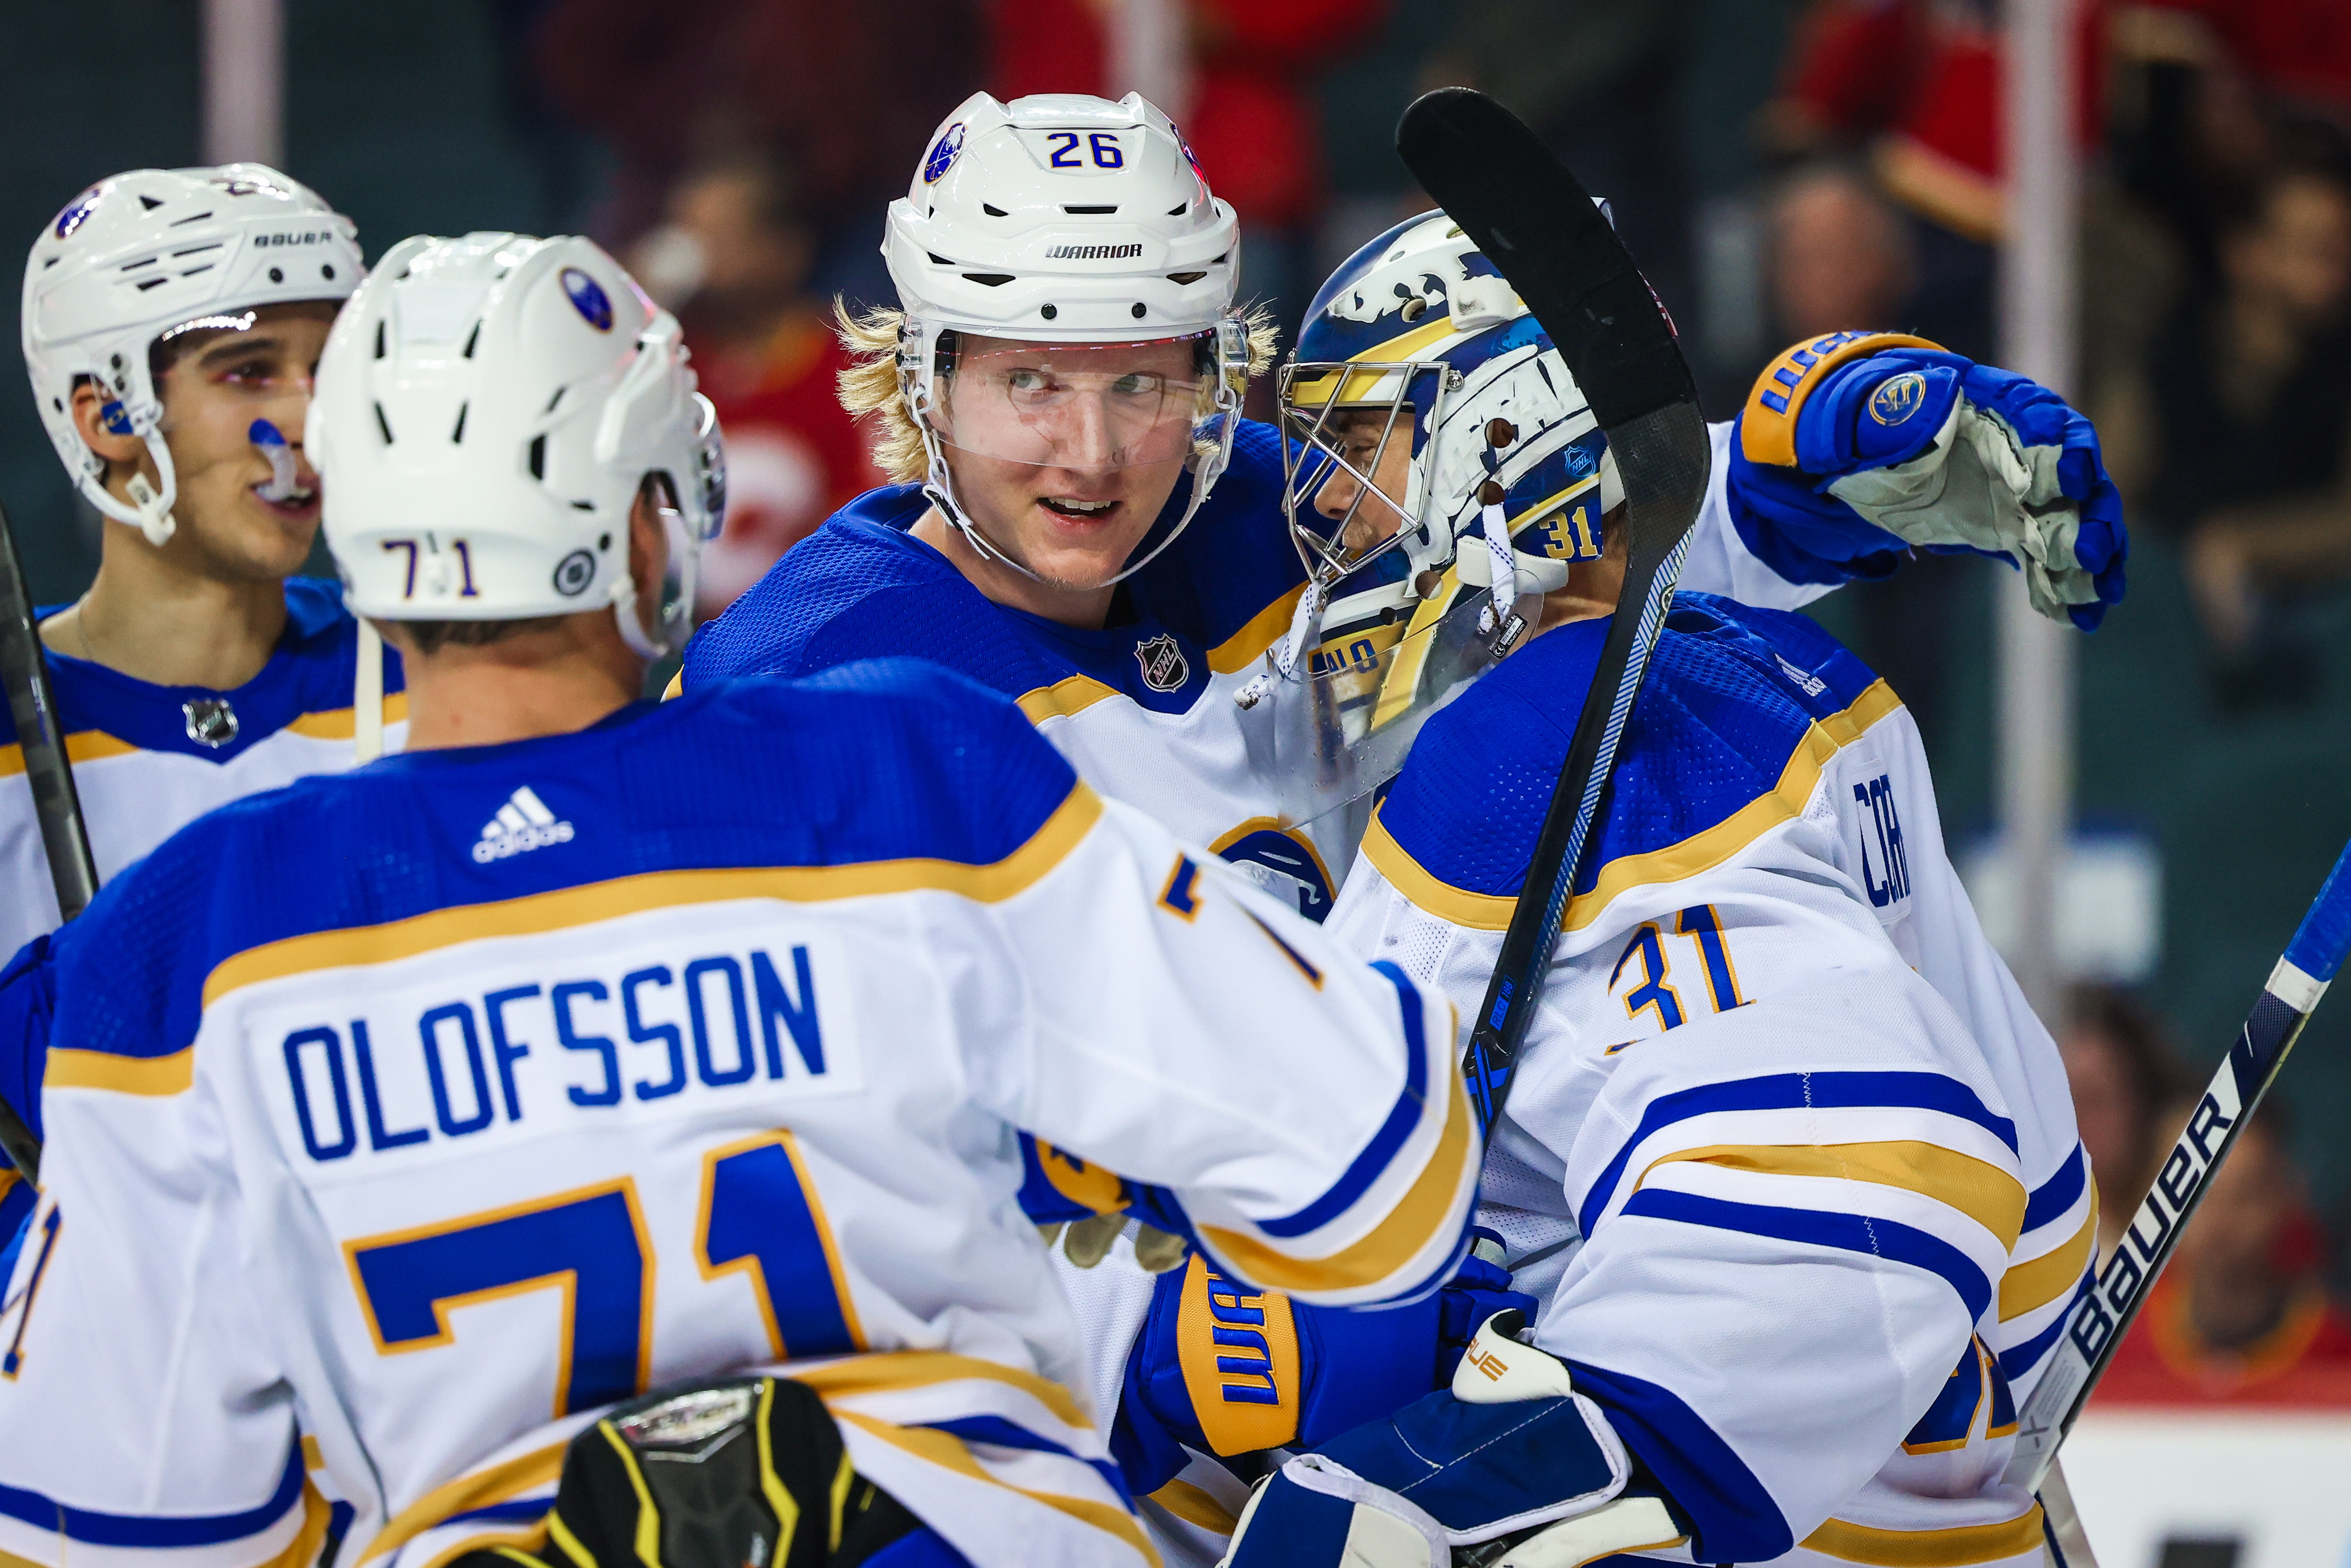 Rasmus Dahlin borrowed from former Sabre to score first NHL